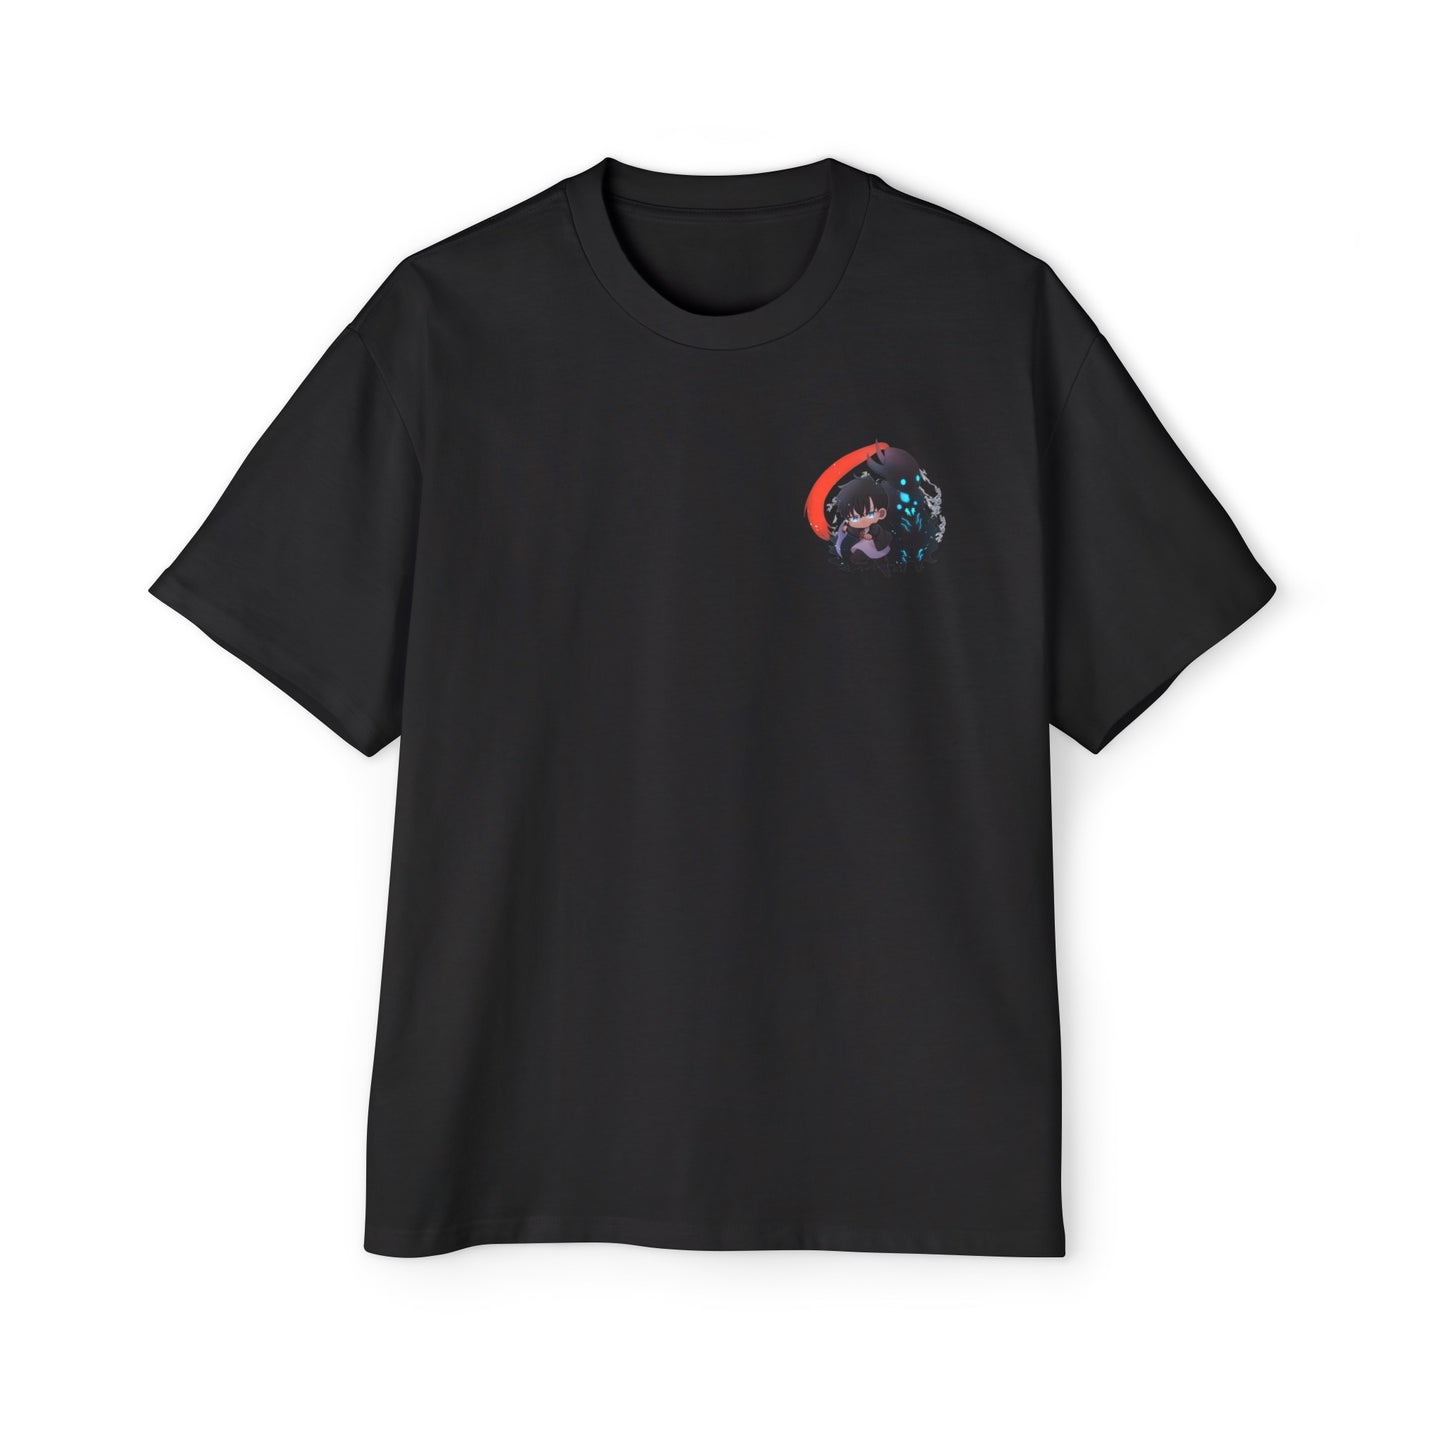 SOLO LEVEING T-SHIRT